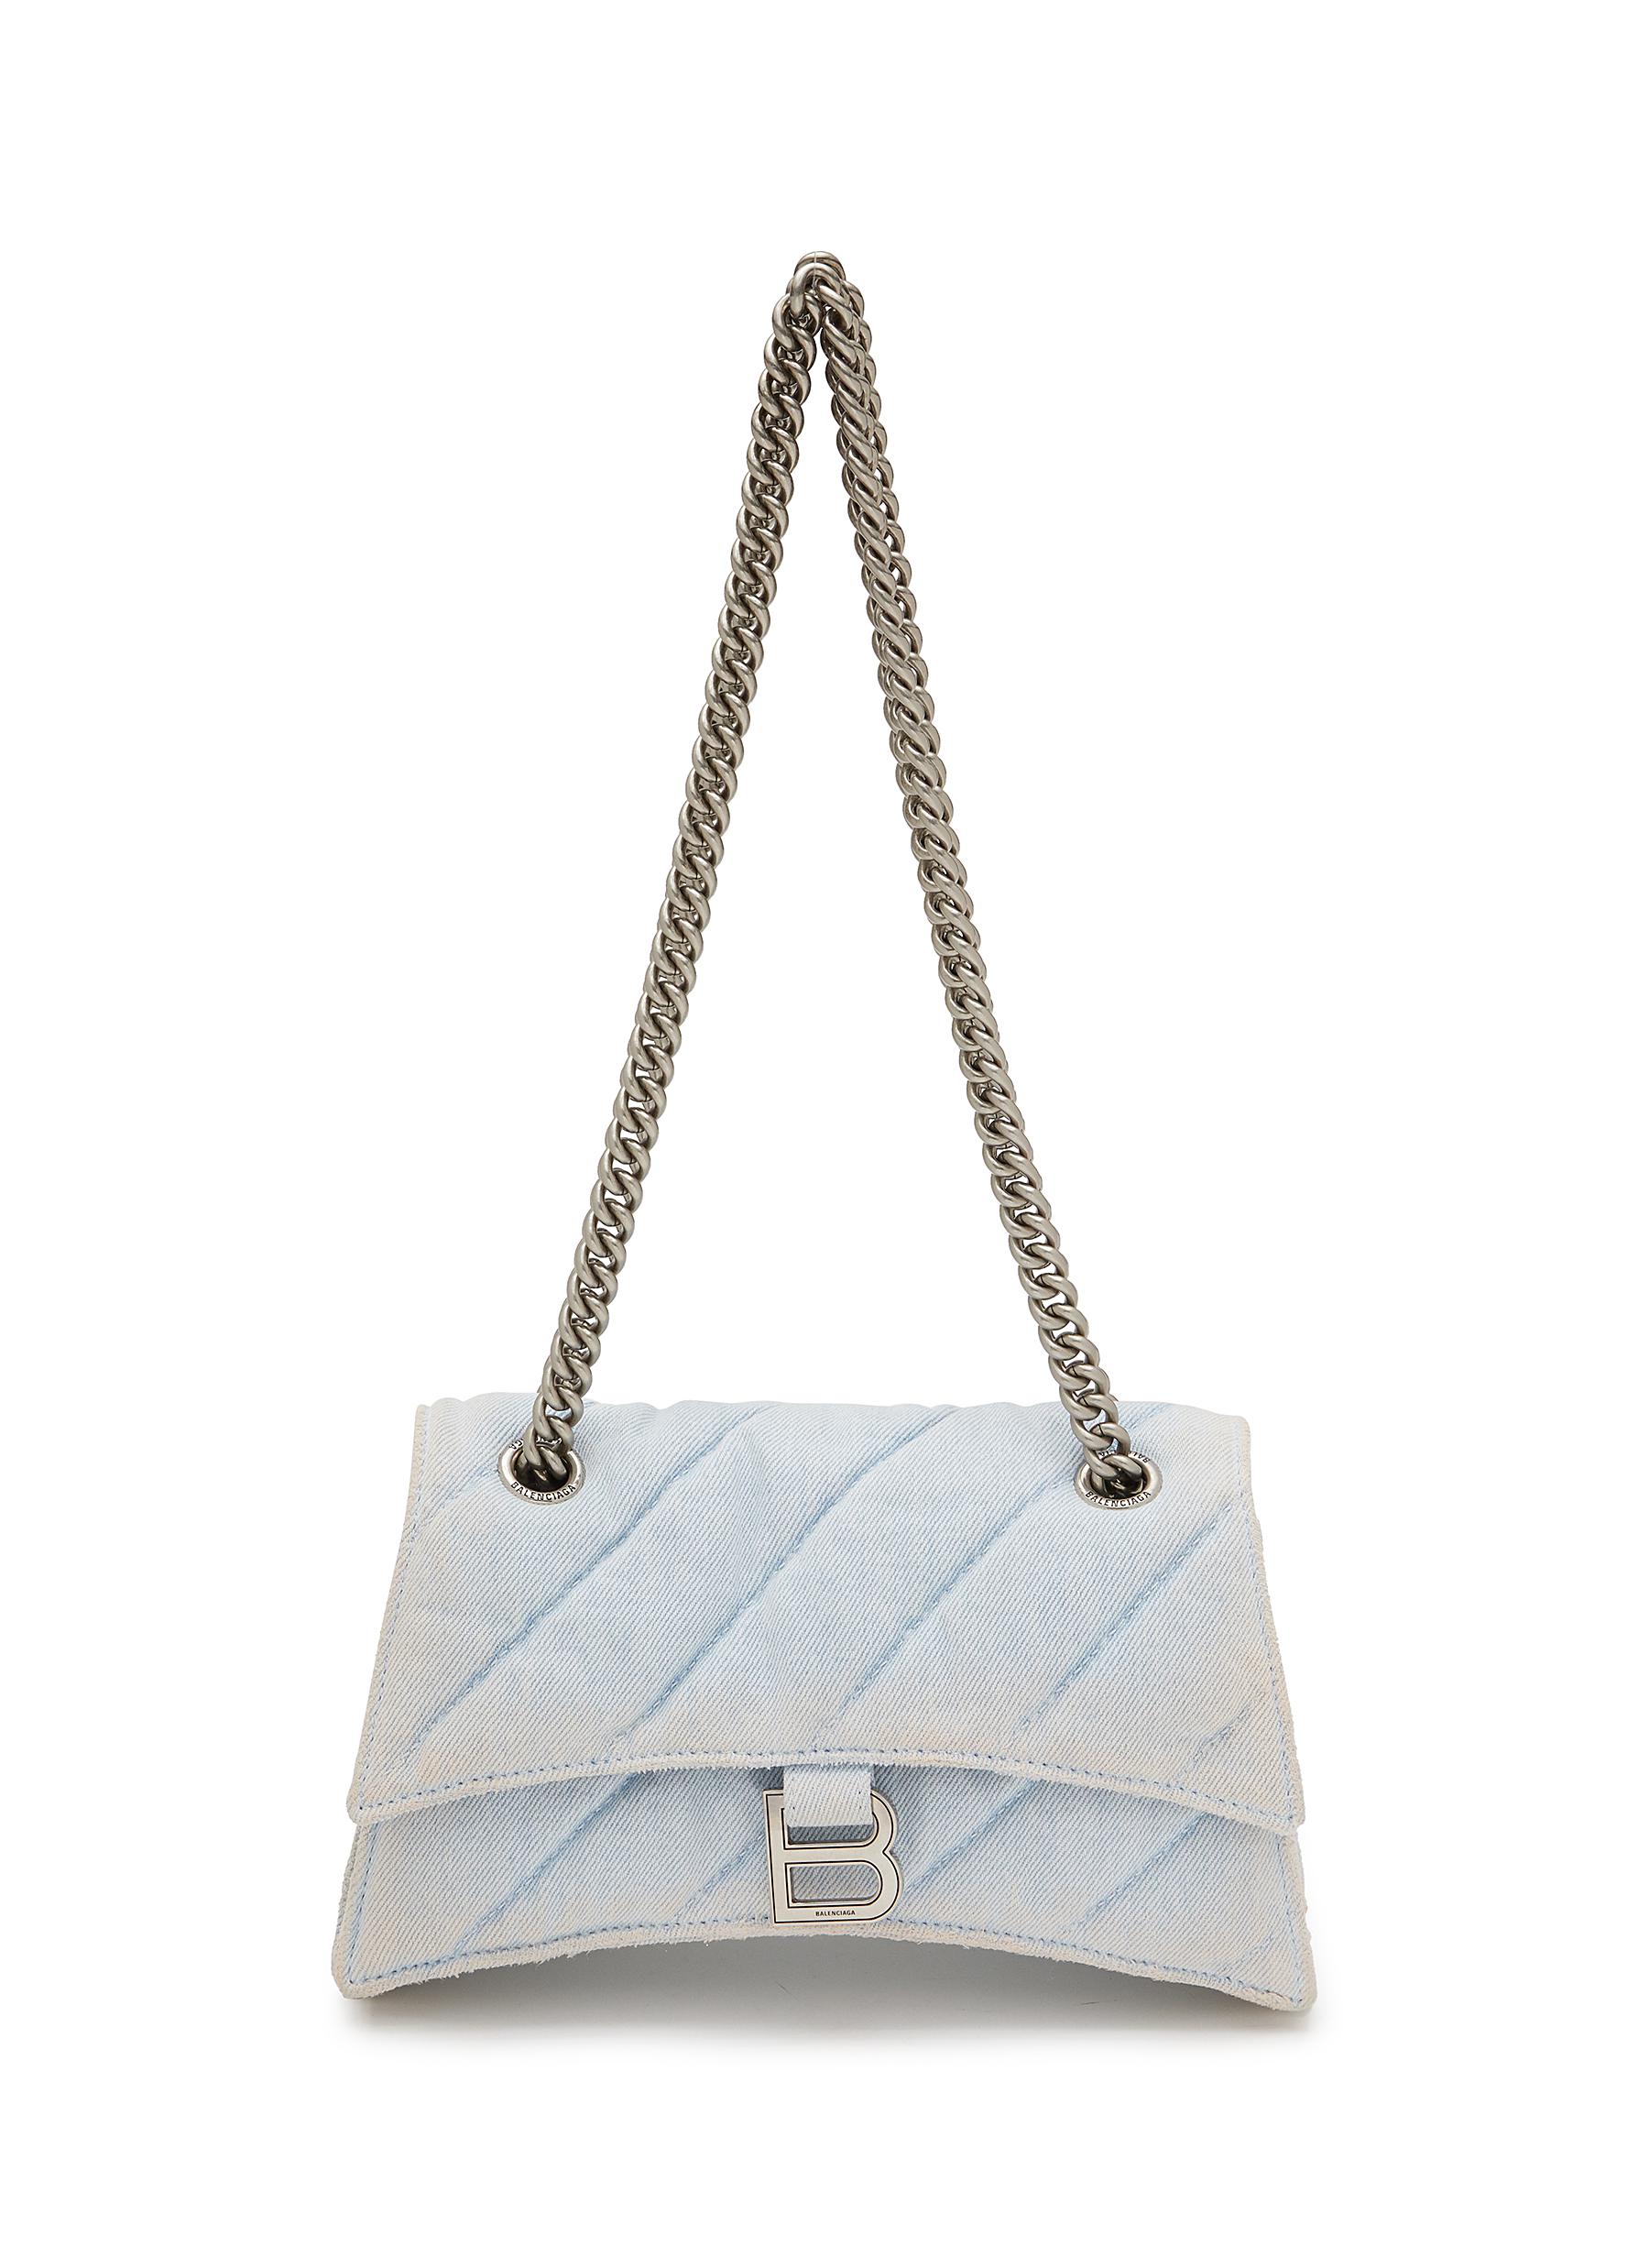 MZ WALLACE Quilted Bowery Crossbody Bag | Bloomingdale's